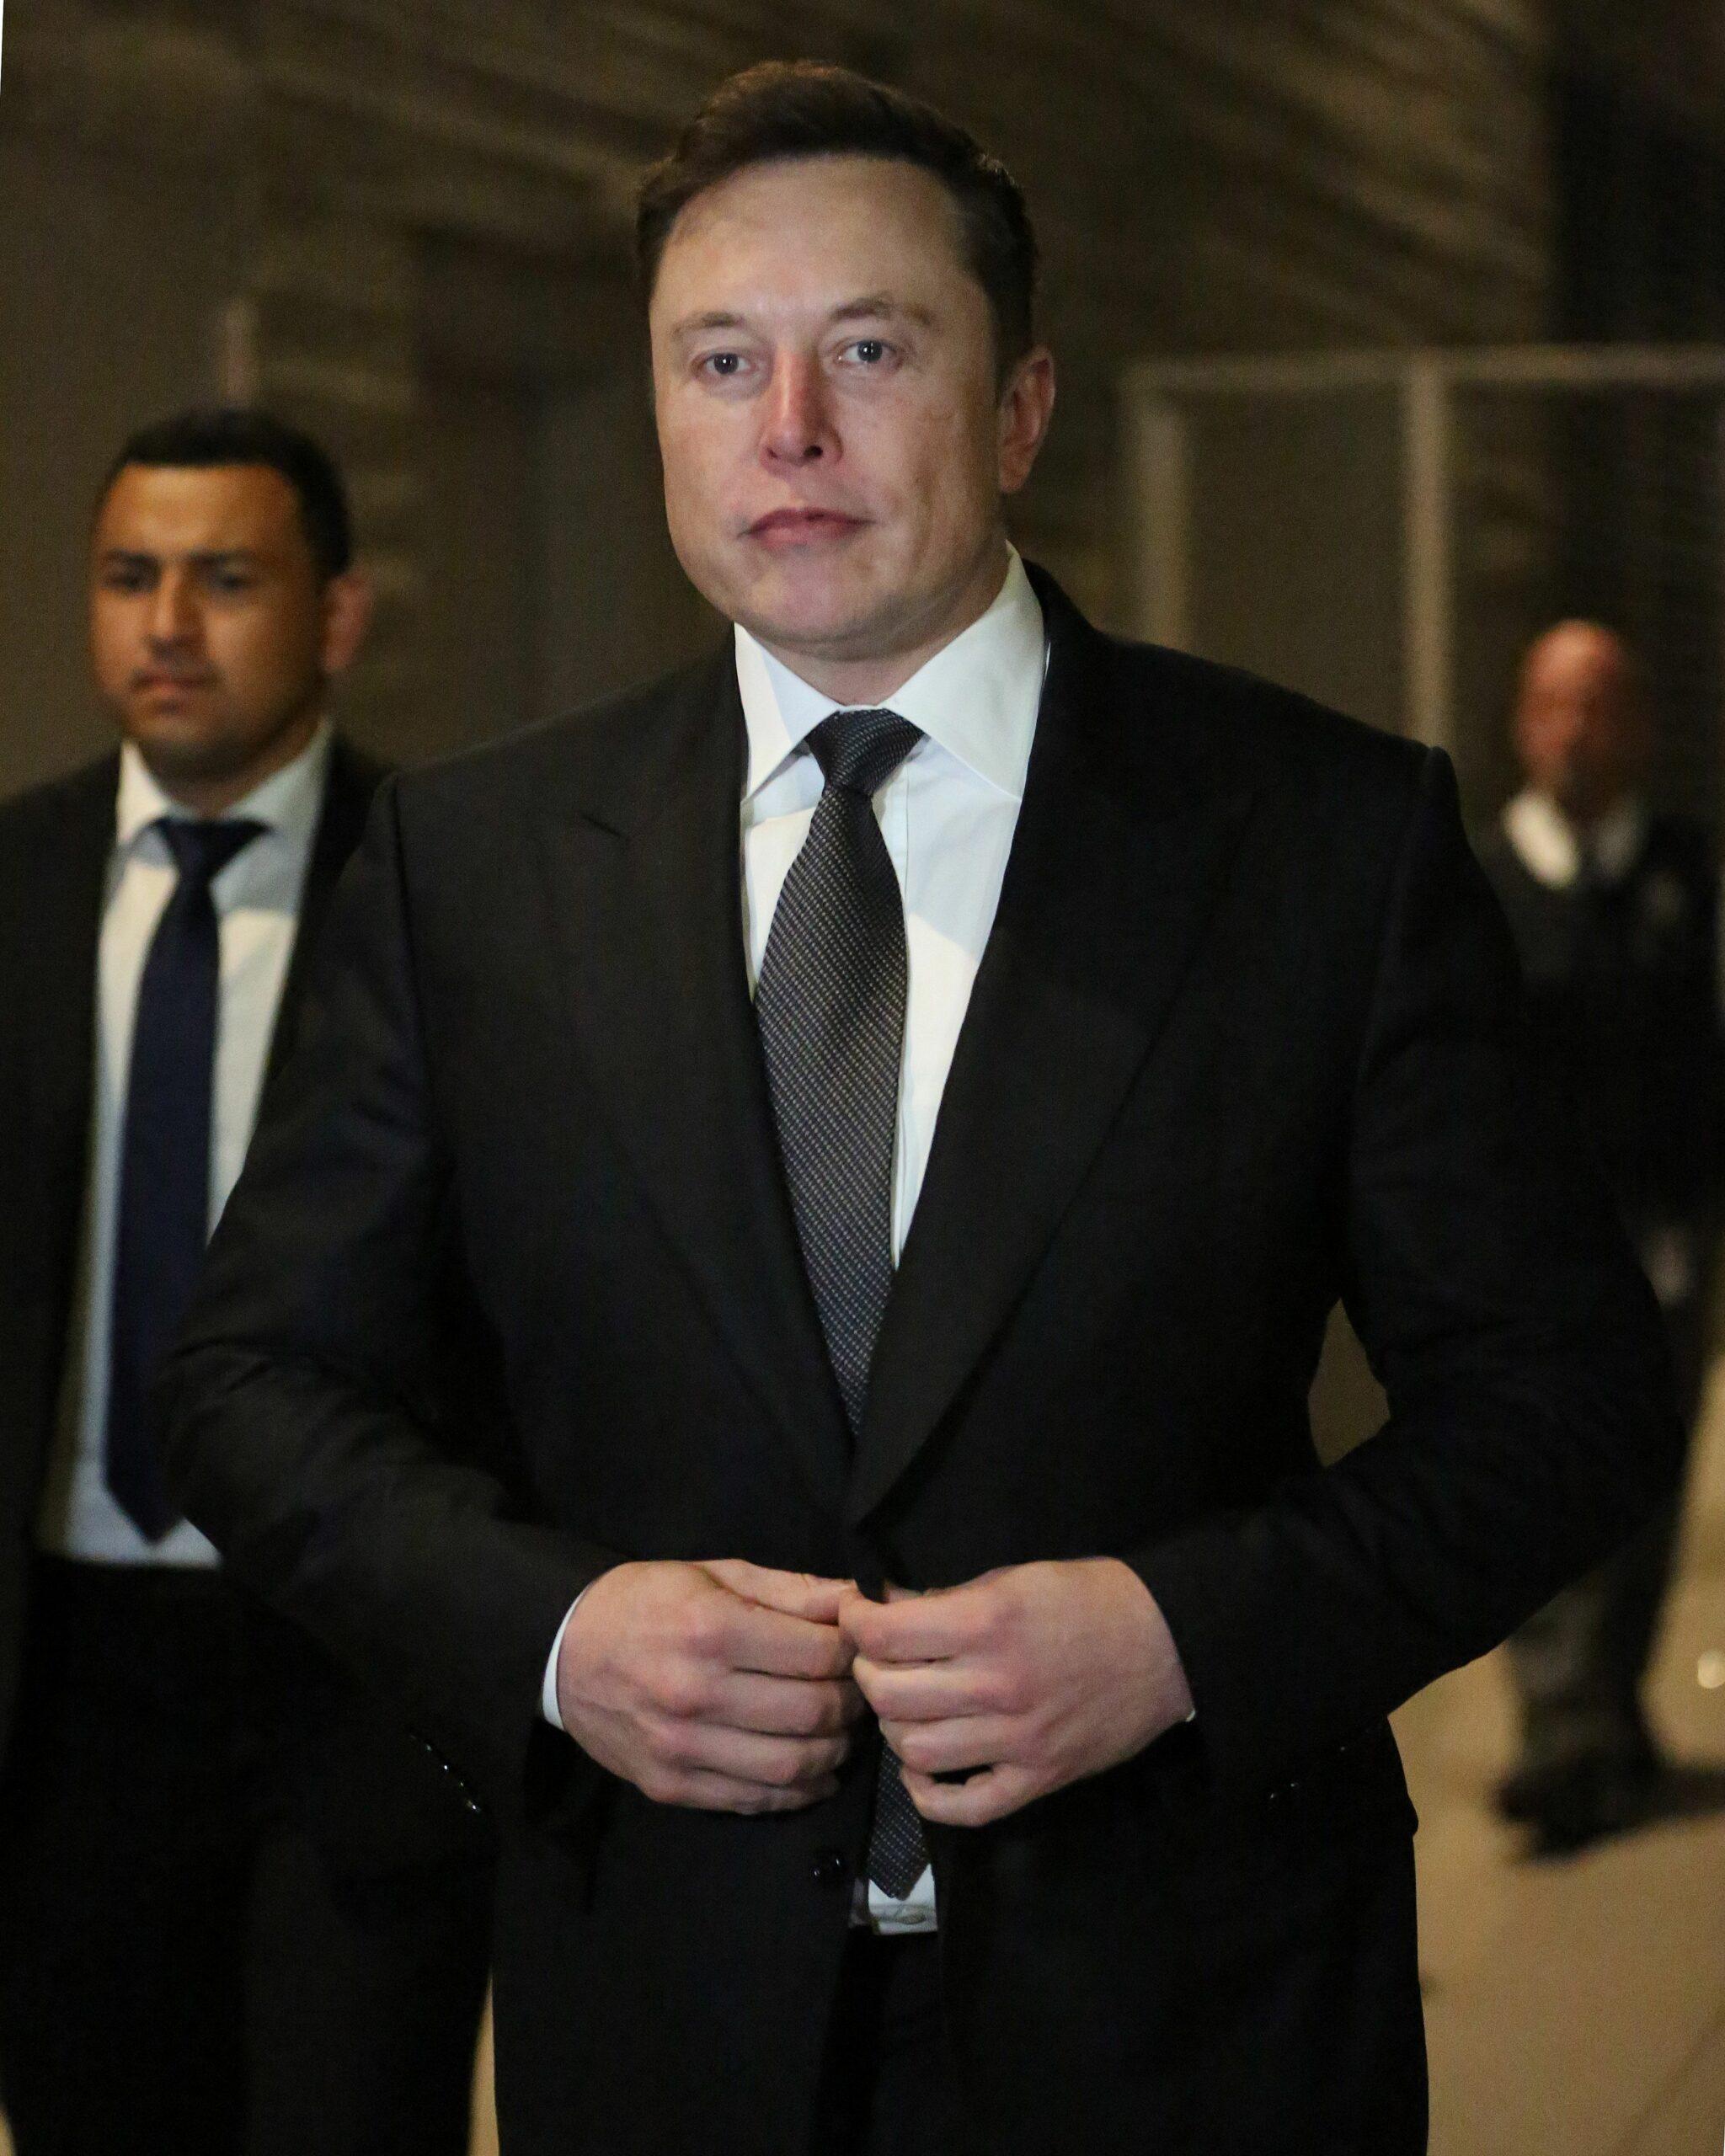 Elon Musk seen leaving Federal court in Los Angeles Elon Musk Takes the Stand in Lawsuit Accusing Him of Defamation Over Pedo Tweet